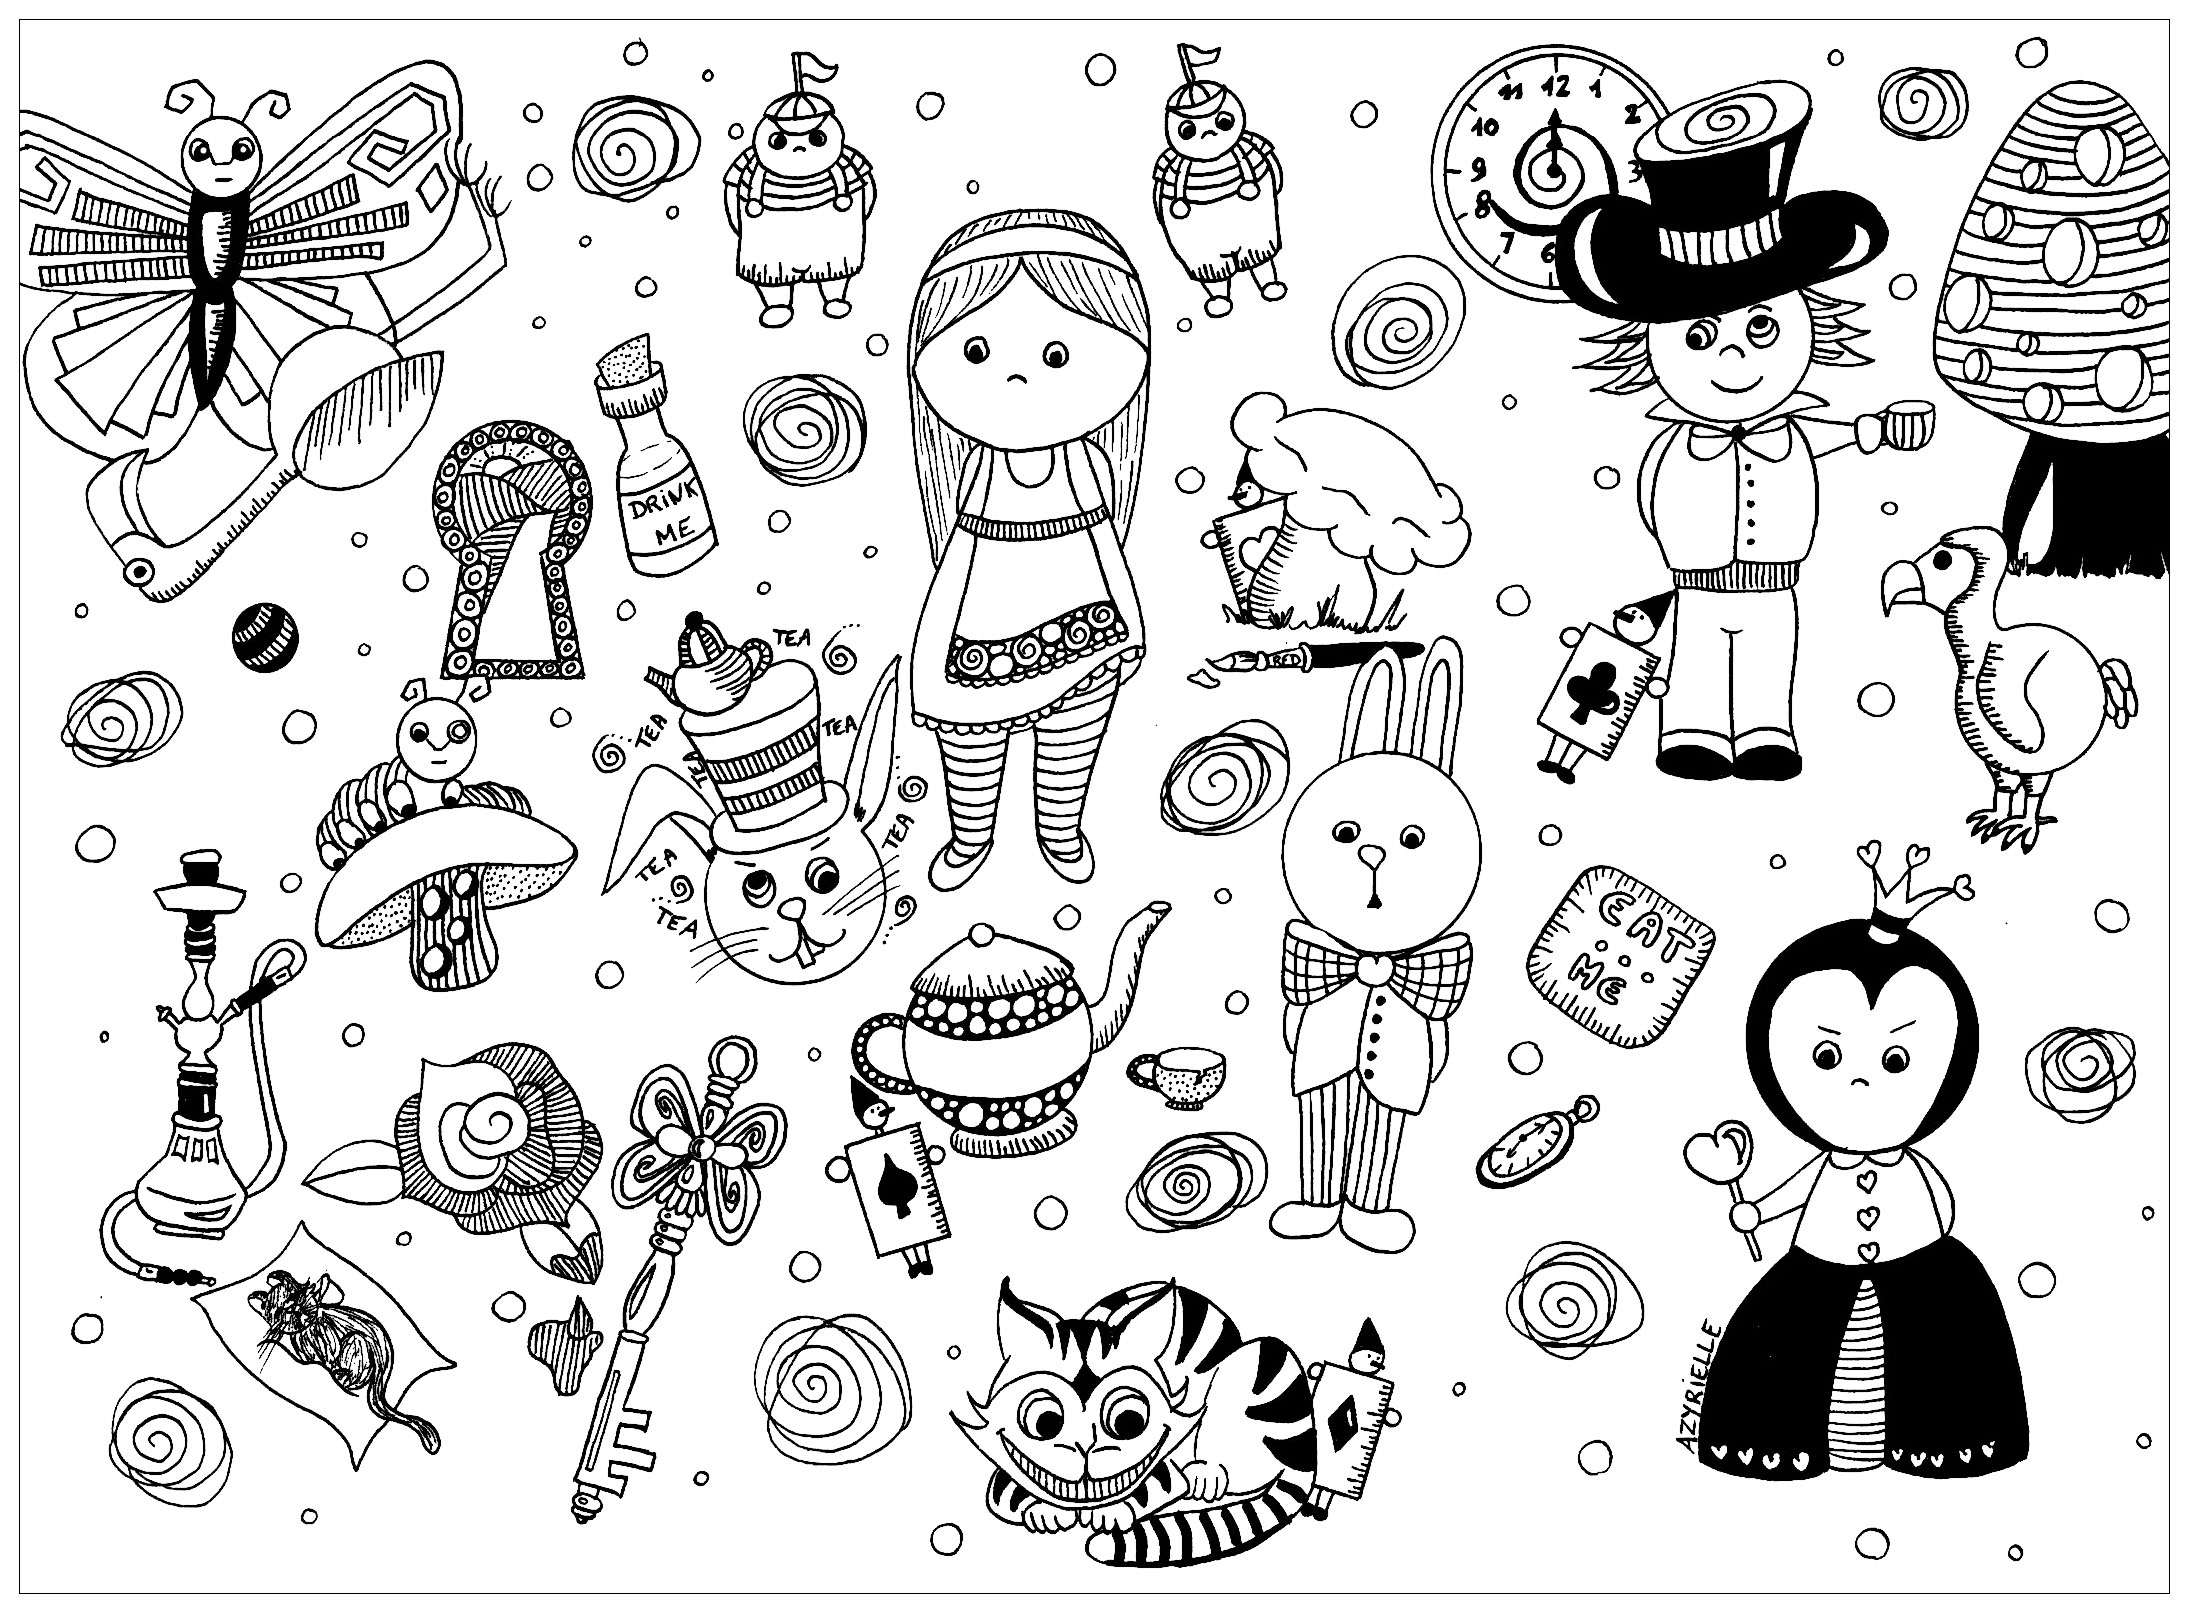 Doodle Art coloring page to print and color for free